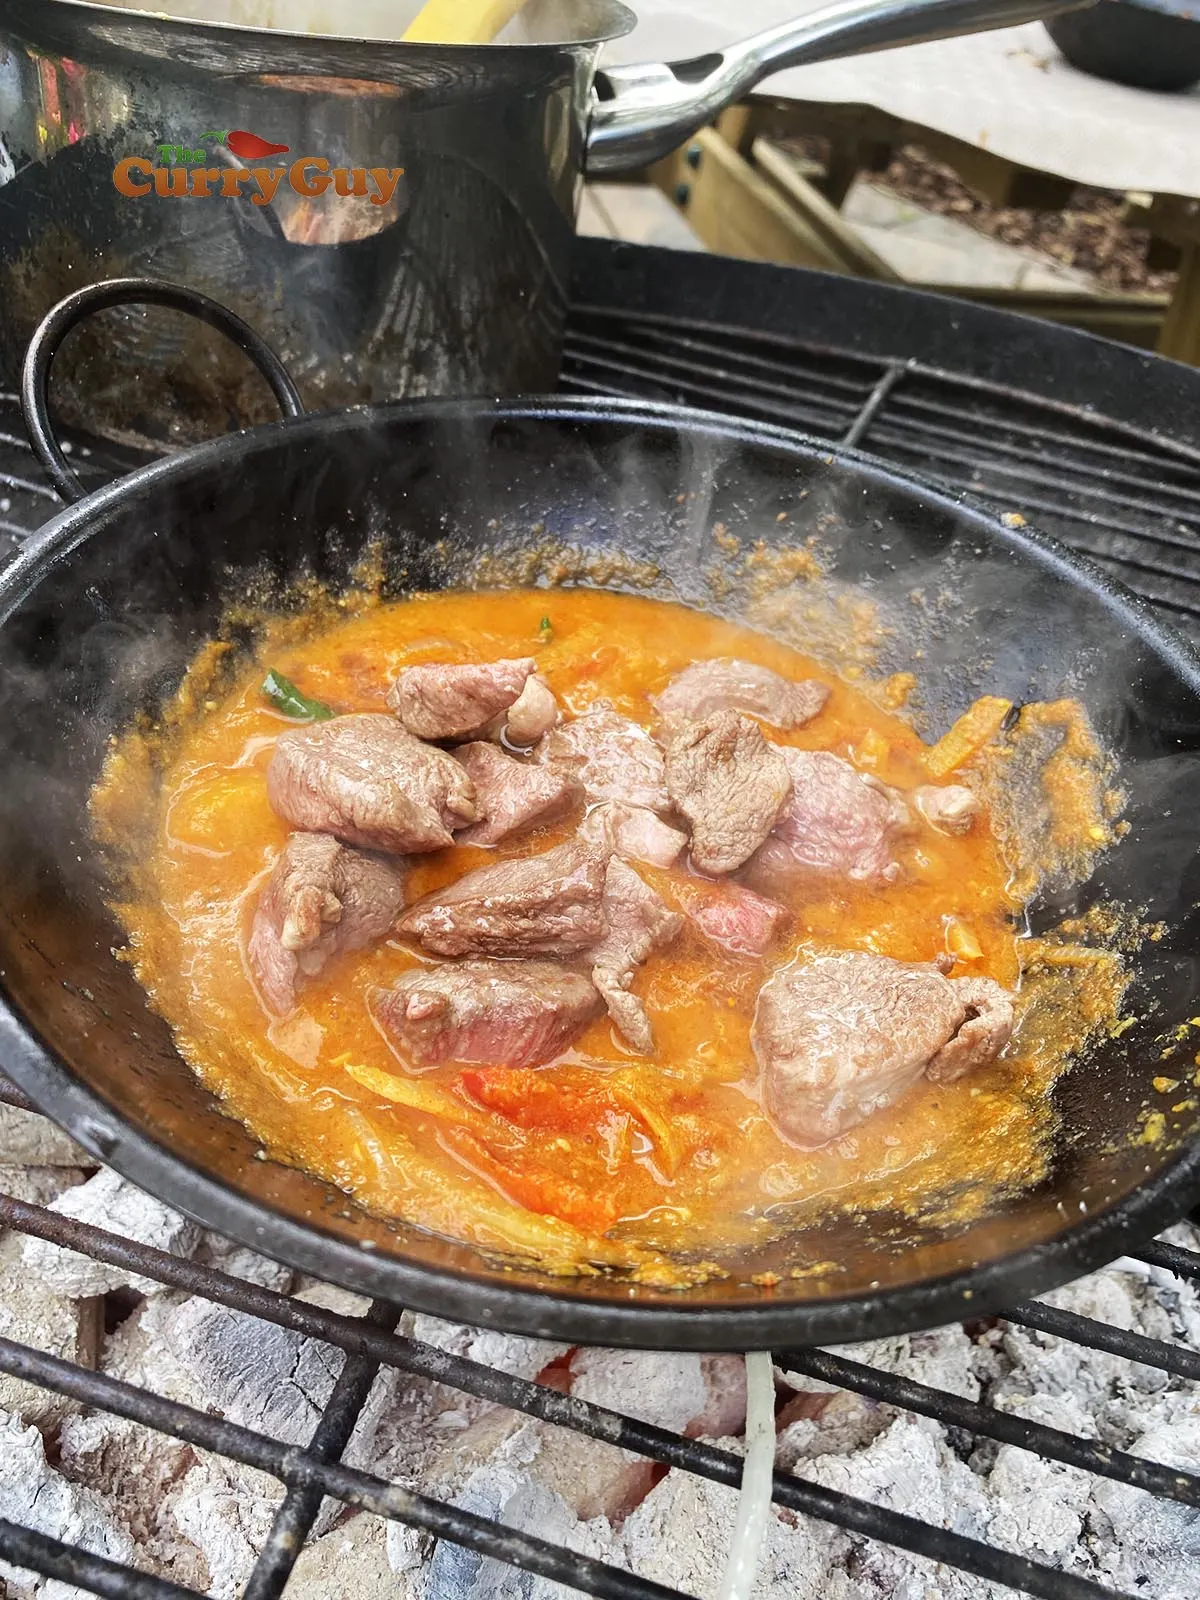 Adding base sauce and duck to balti